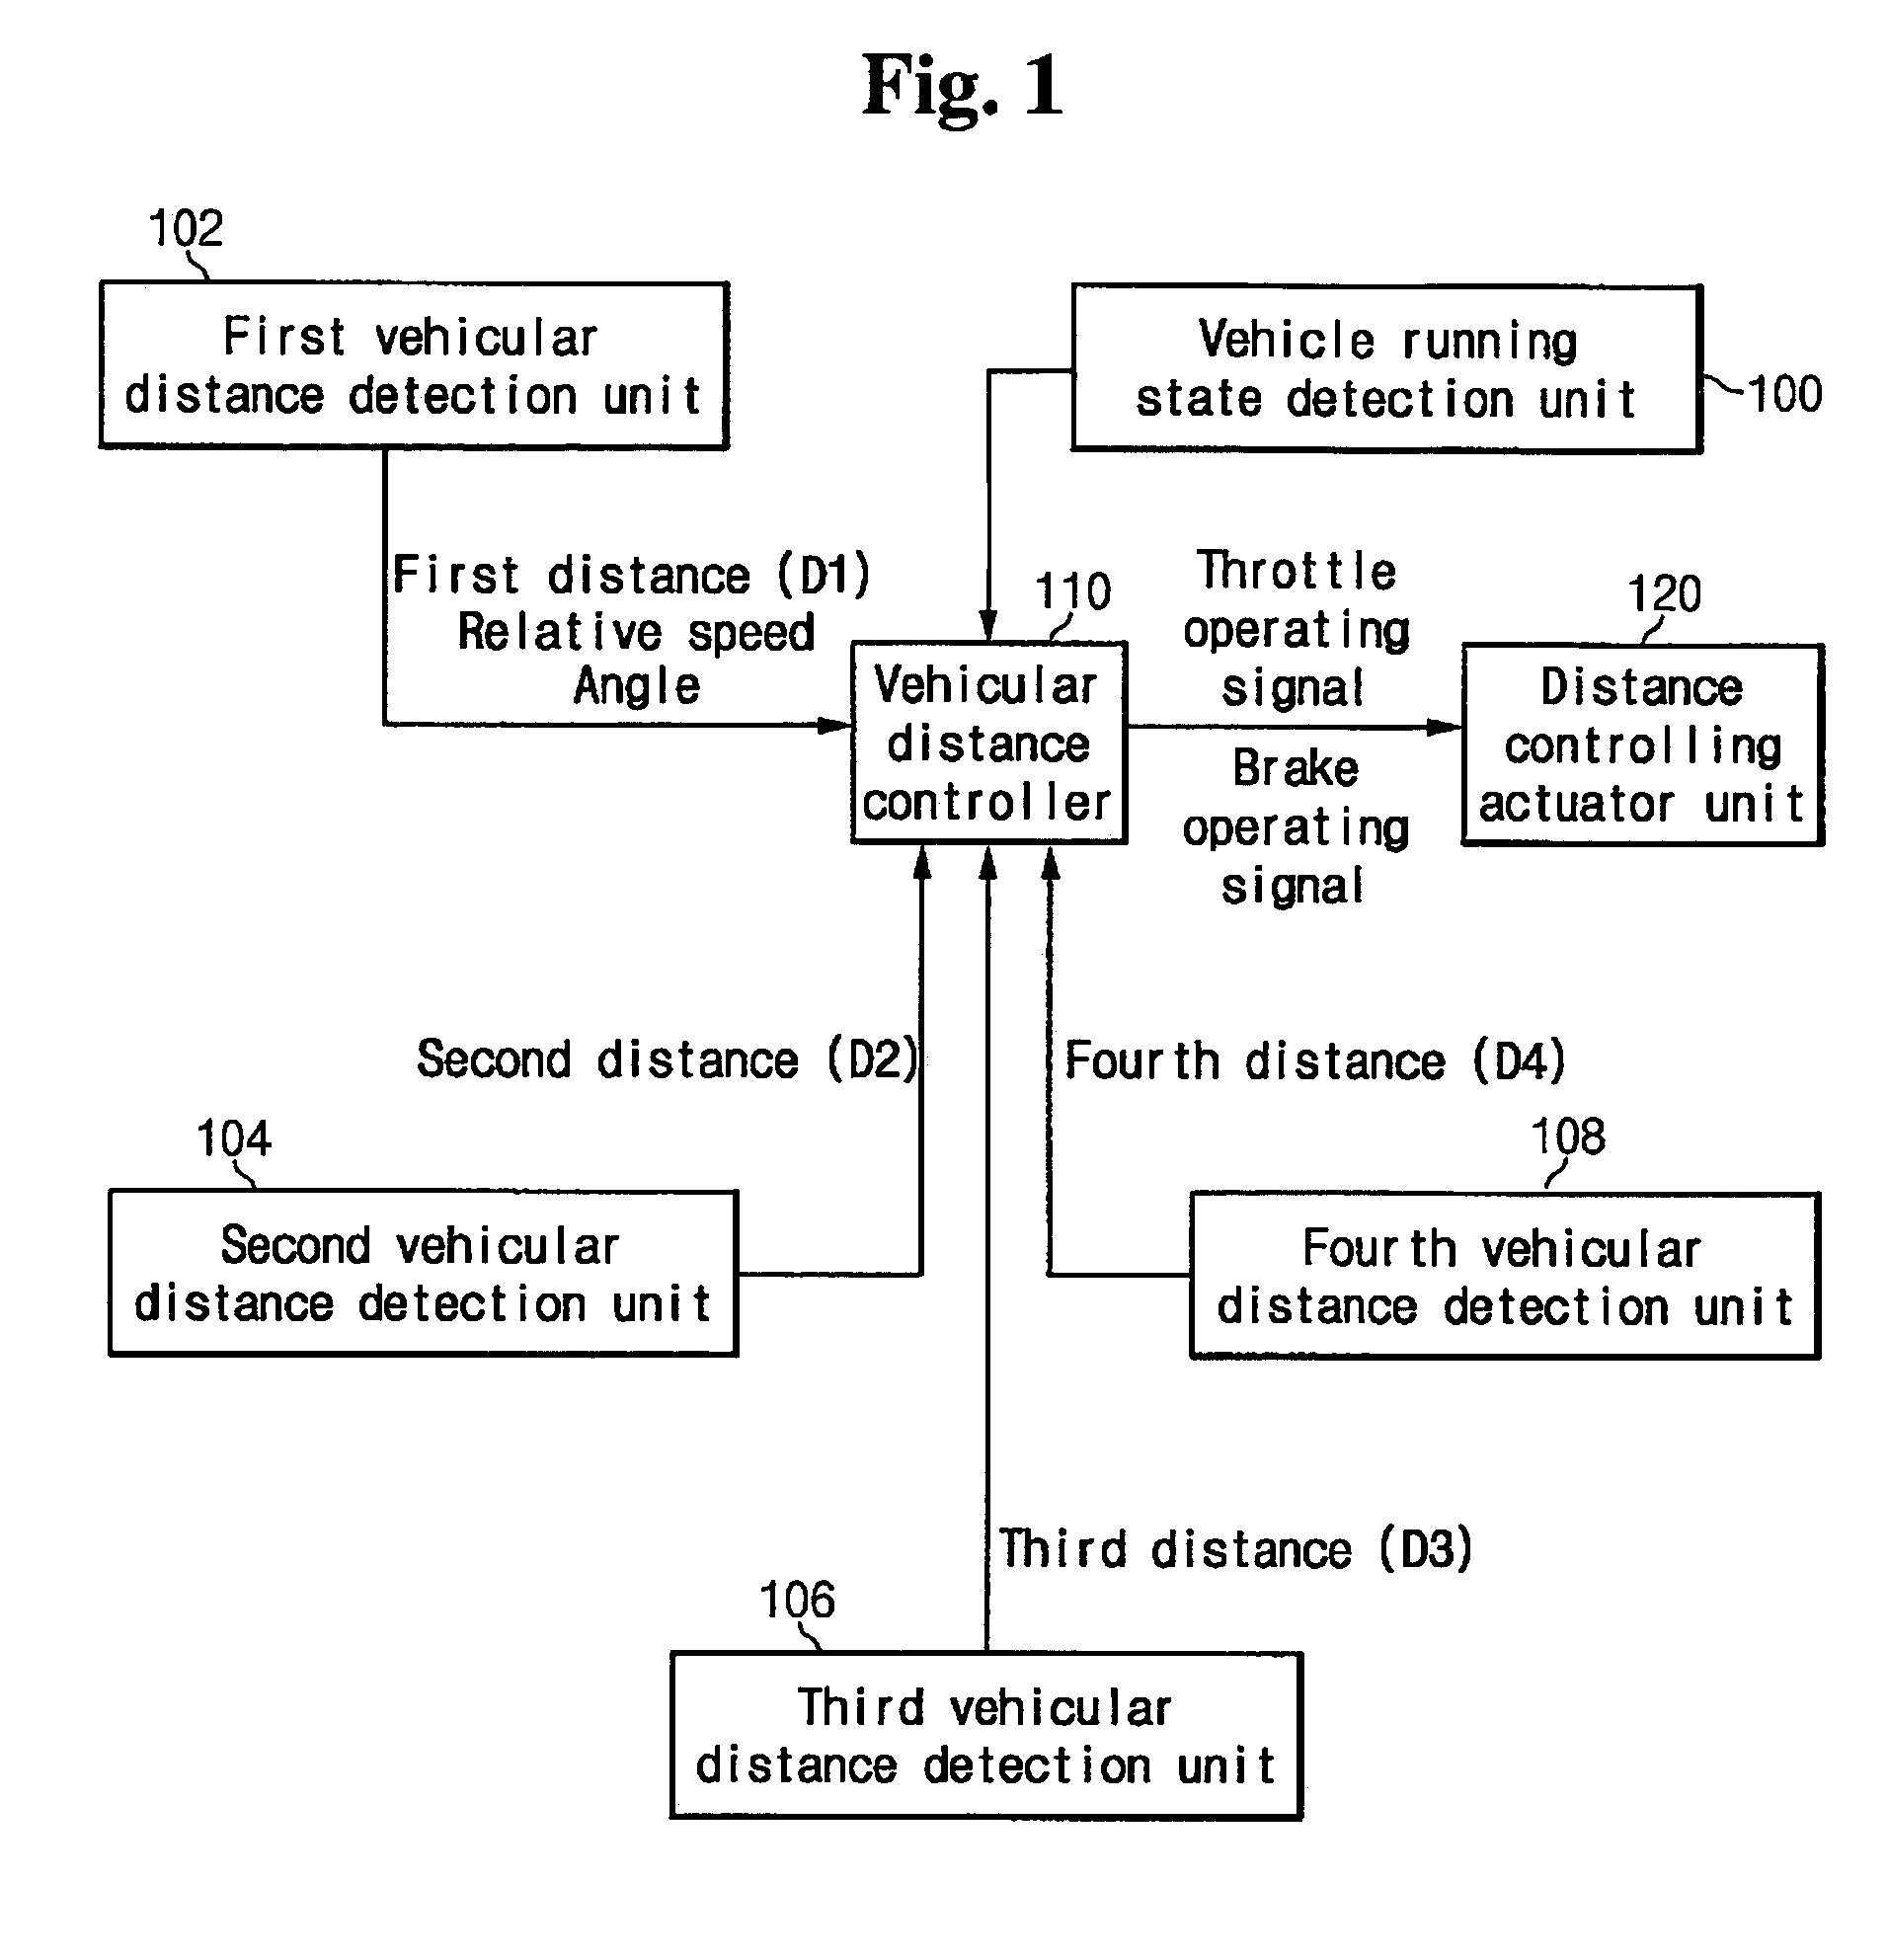 Apparatus for controlling distance between vehicles